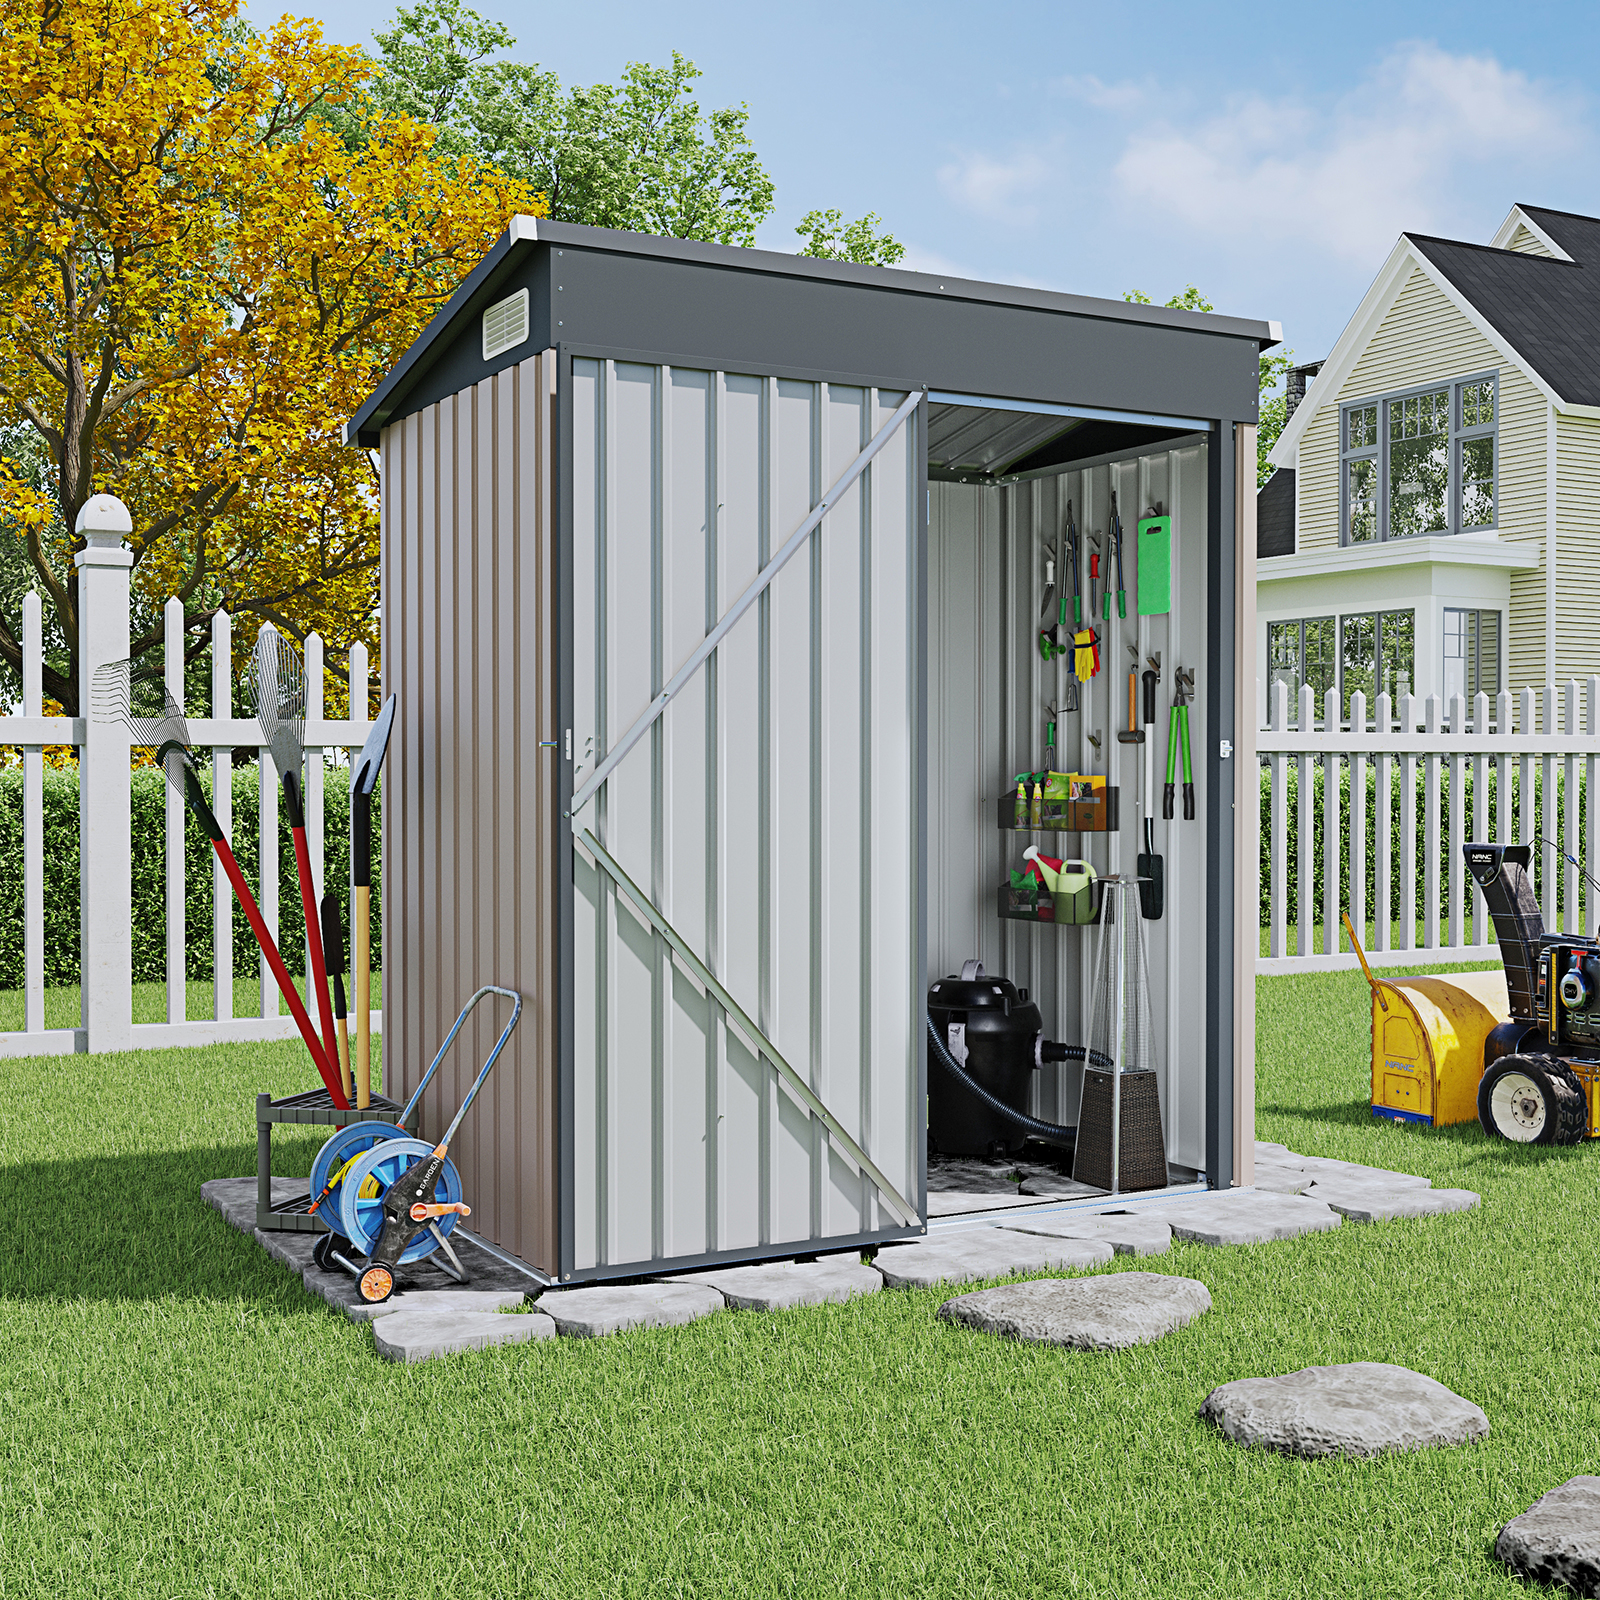 OC Orange-Casual 5' x 3' FT Outdoor Storage Shed, Metal Garden Tool Shed with Lockable Door, Outside Sheds & Storage Galvanized Steel, Brown - image 1 of 10